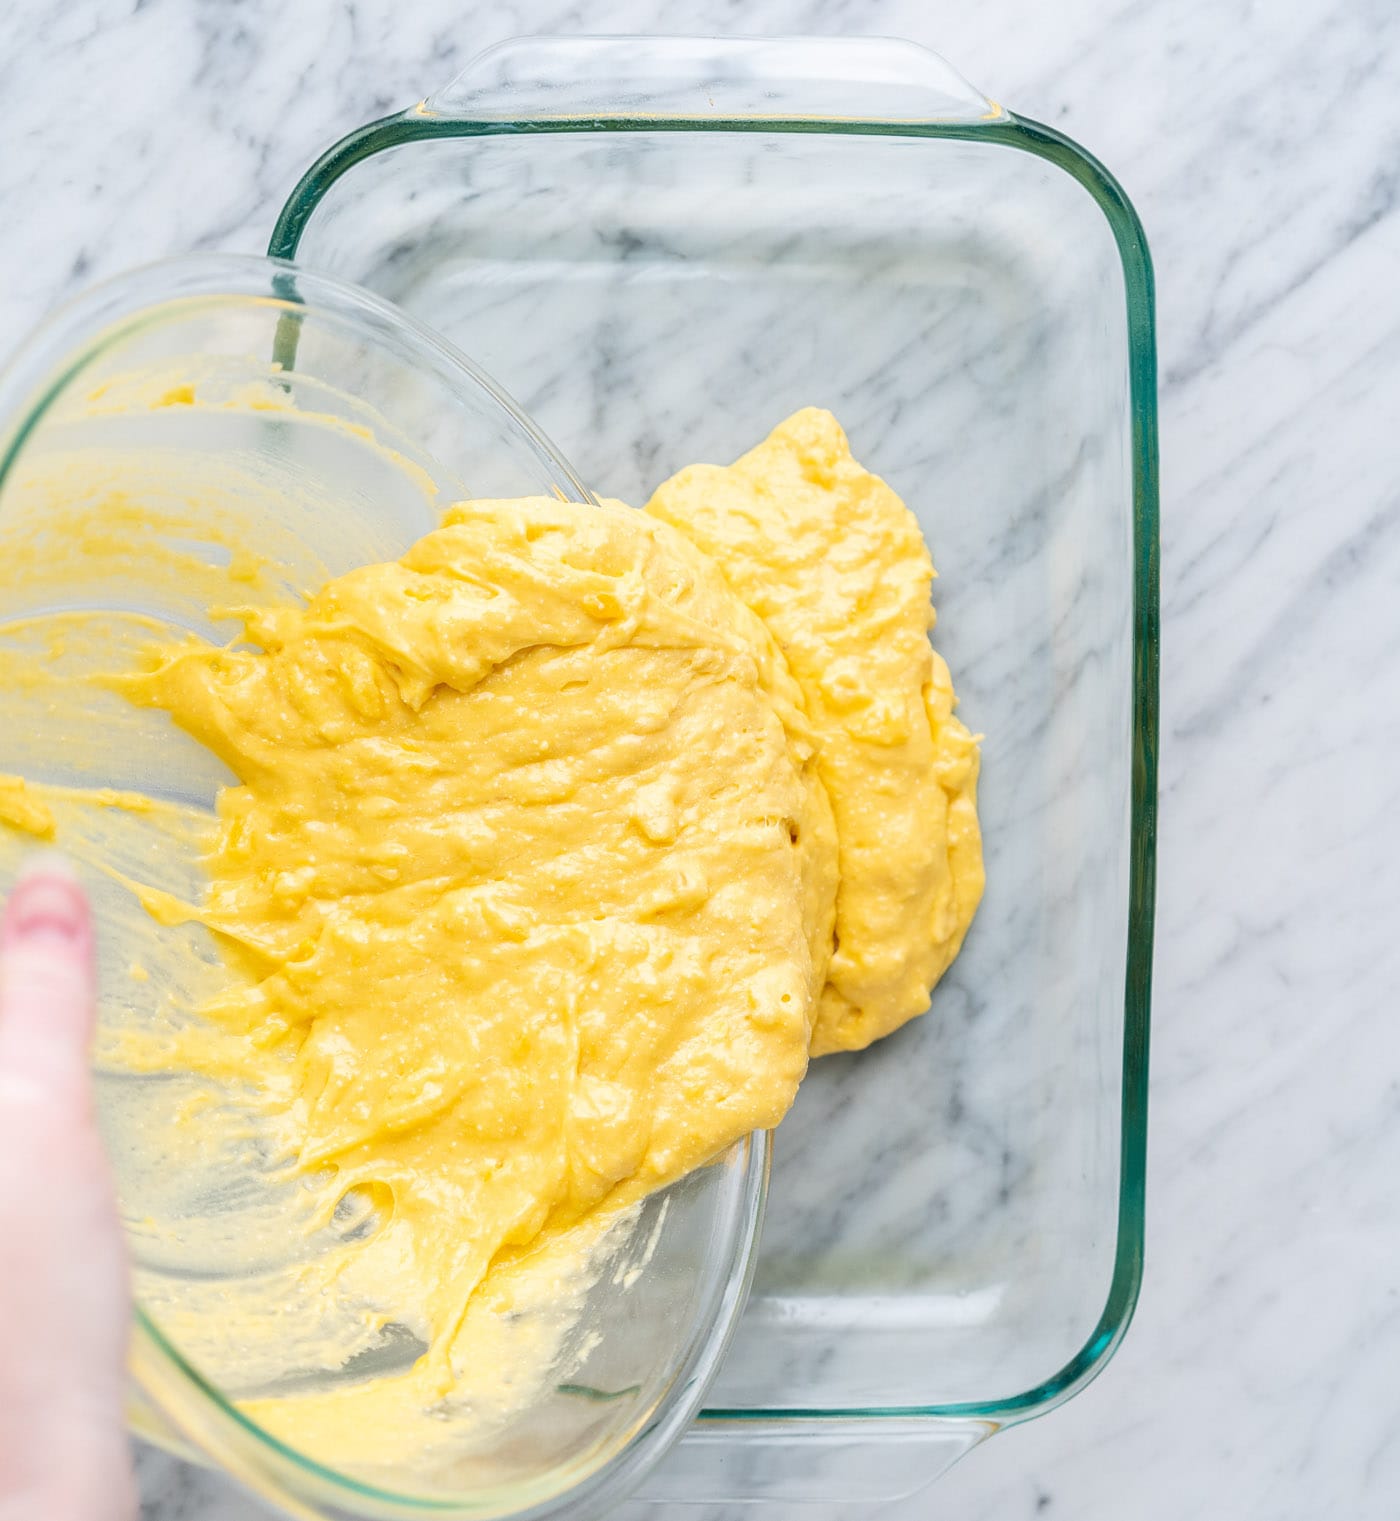 pouring pineapple cake batter into a baking dish